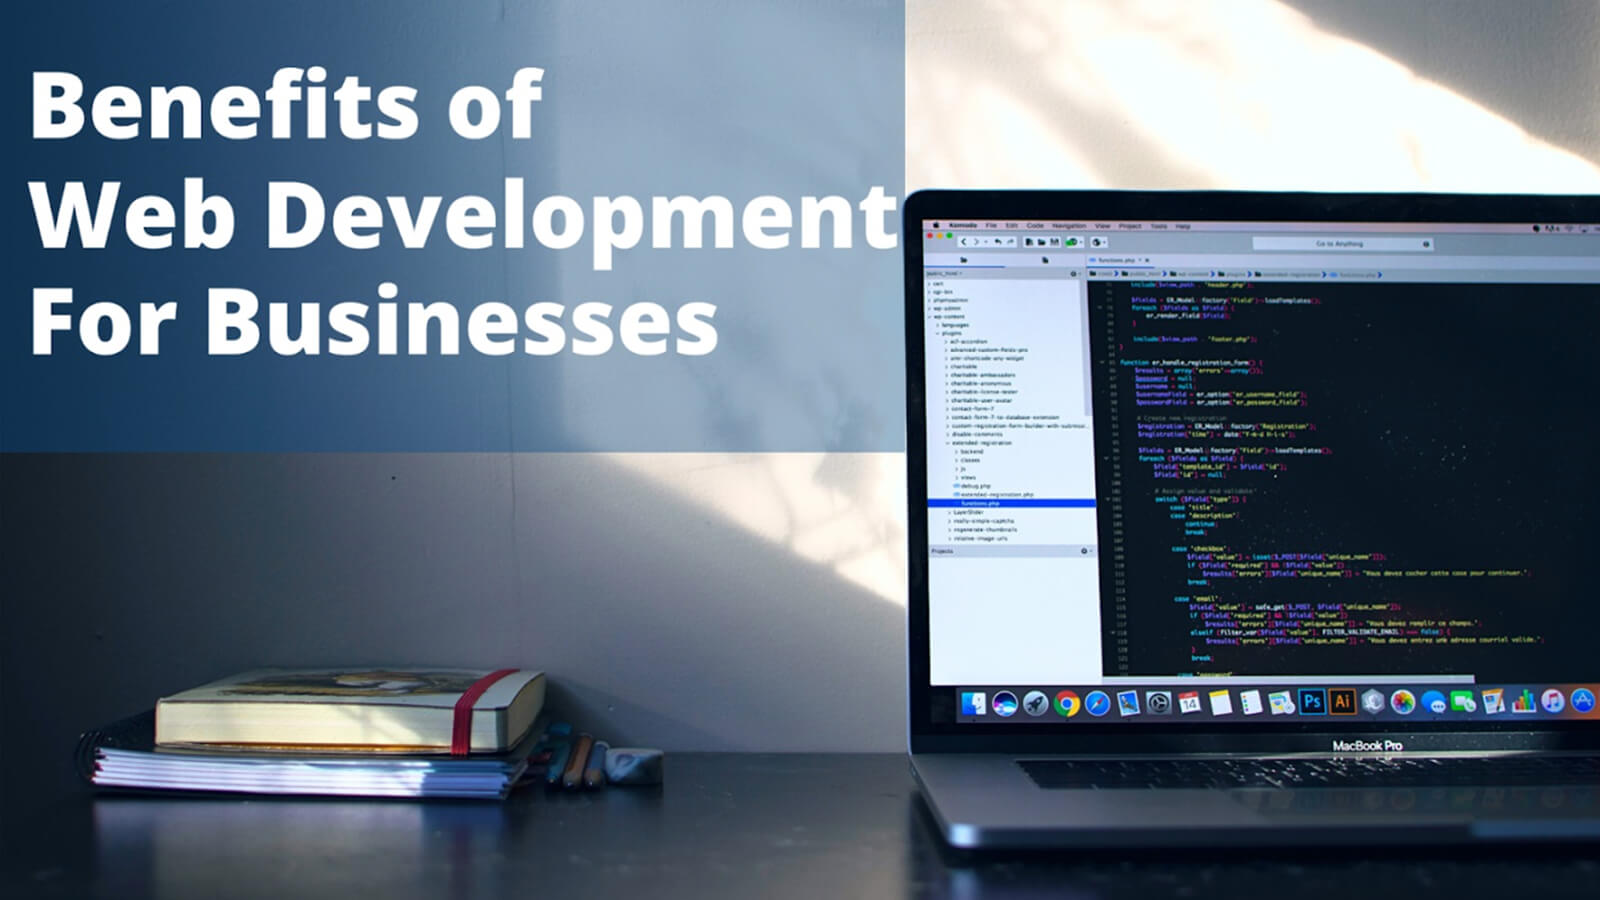 Benefits of Web Development for Businesses